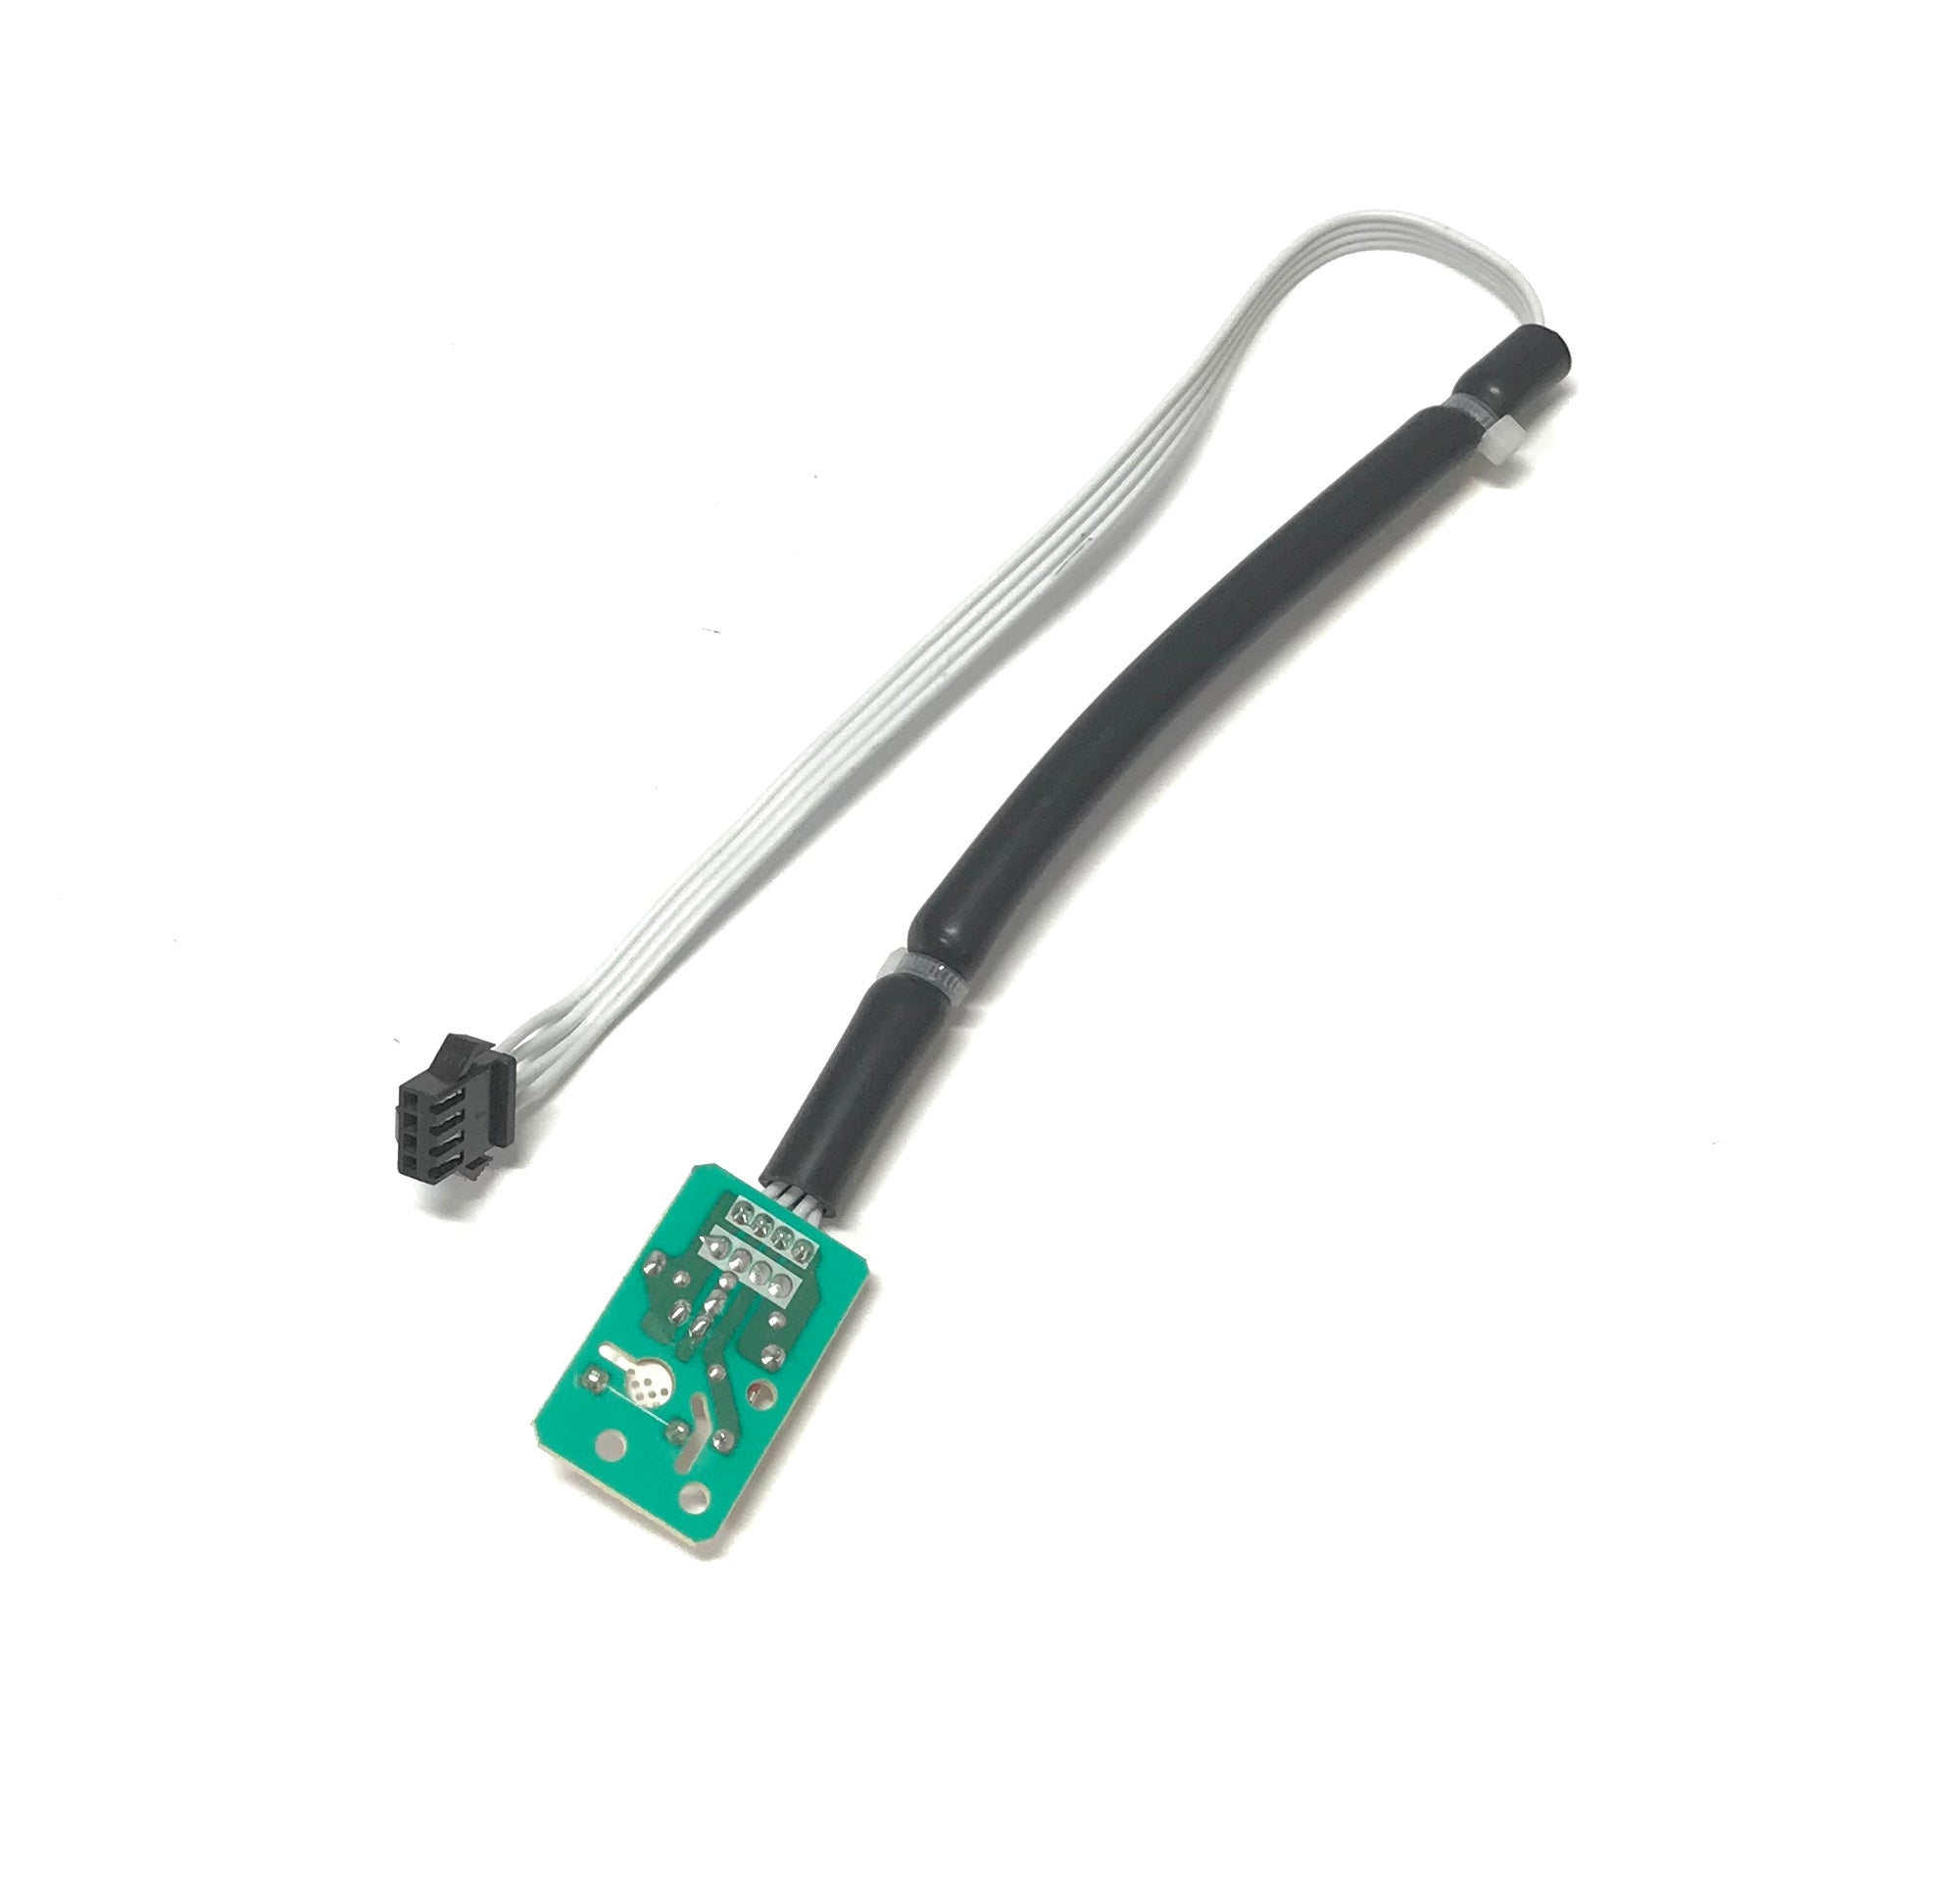 OEM Delonghi Air Conditioner AC Sensor Originally Shipped With PACEX390LVYN6ABK, PACEX140EWBK1A, PACEX360LVYN6A